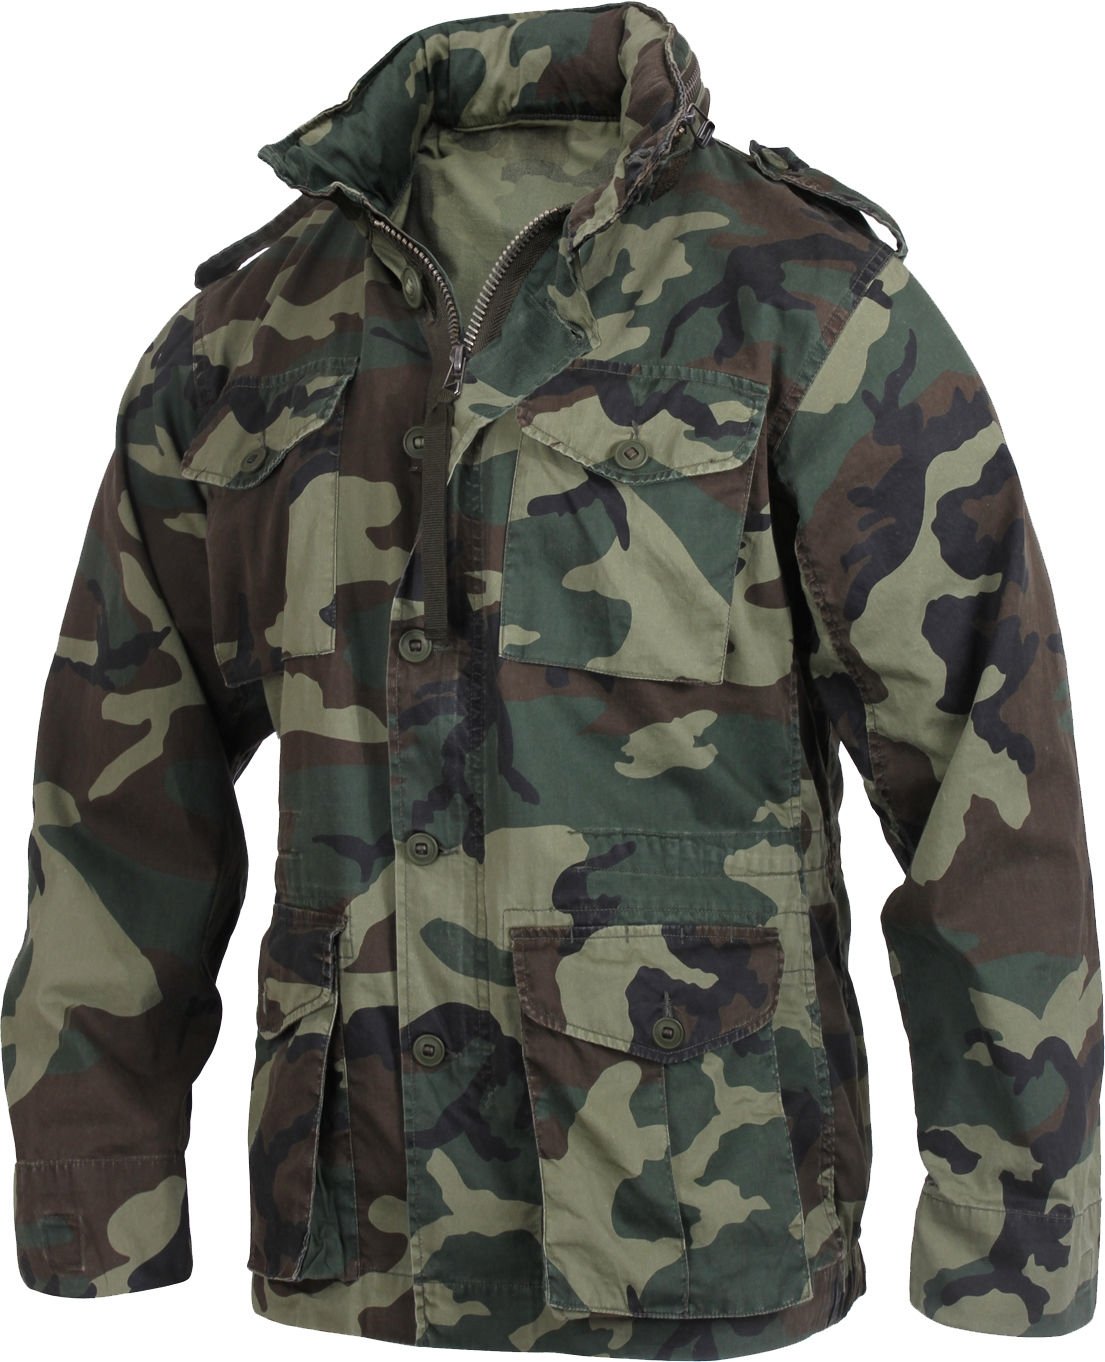 Mens Military Vintage Style Lightweight M65 Jacket Woodland Camo Rothco ...